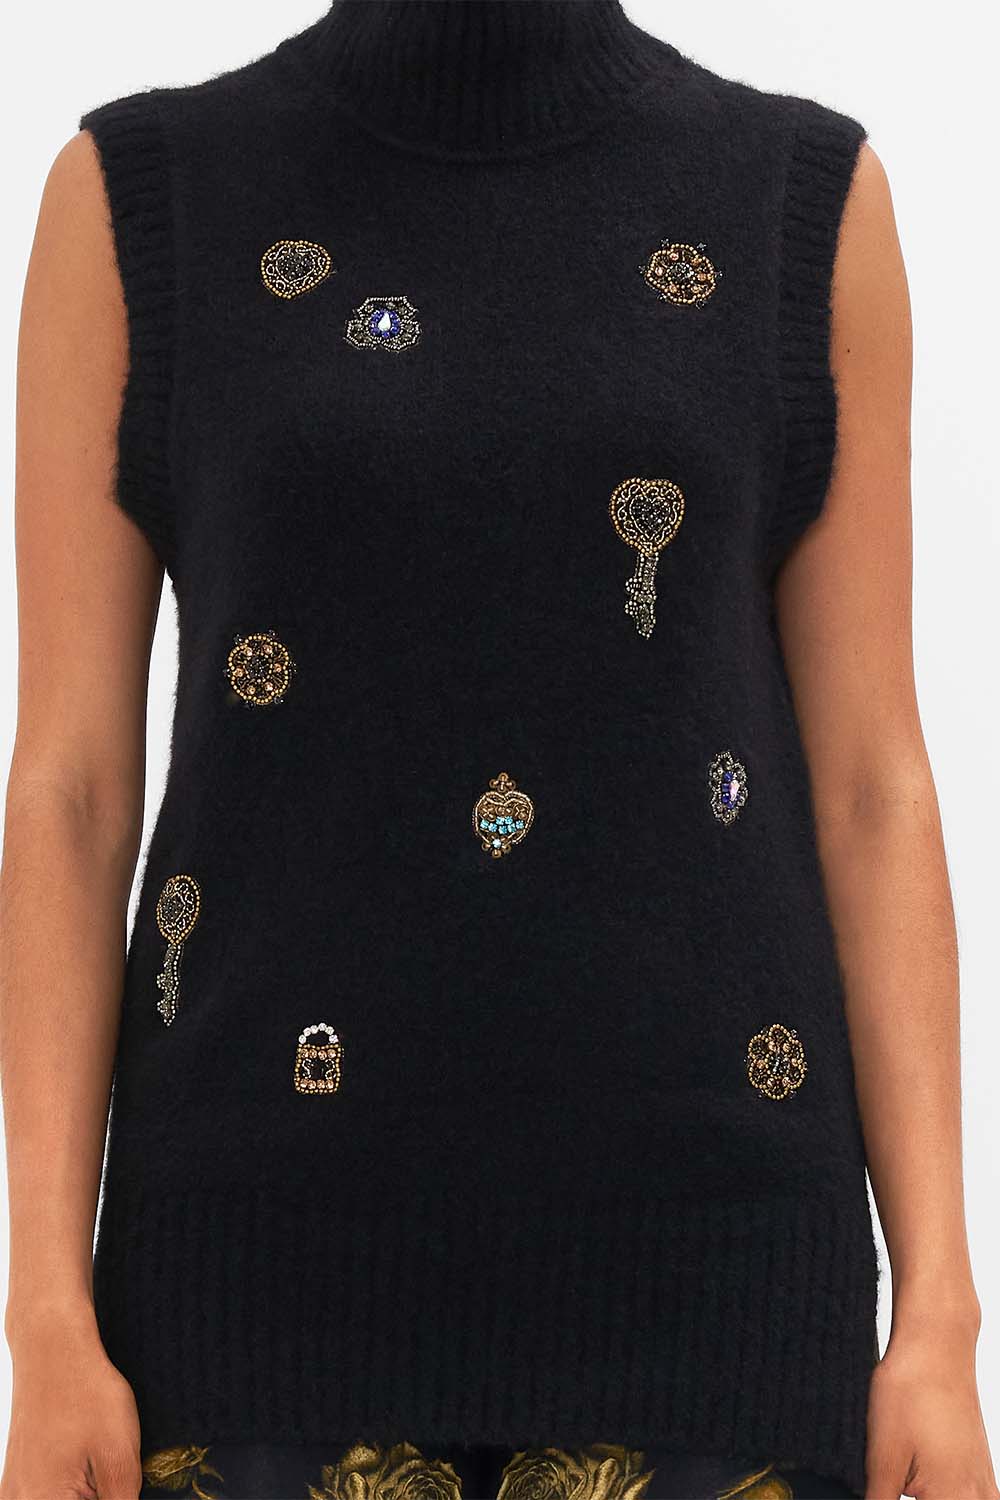 CAMILLA leopard relaxed sleeveless turtleneck knit top in Amsterglam print.